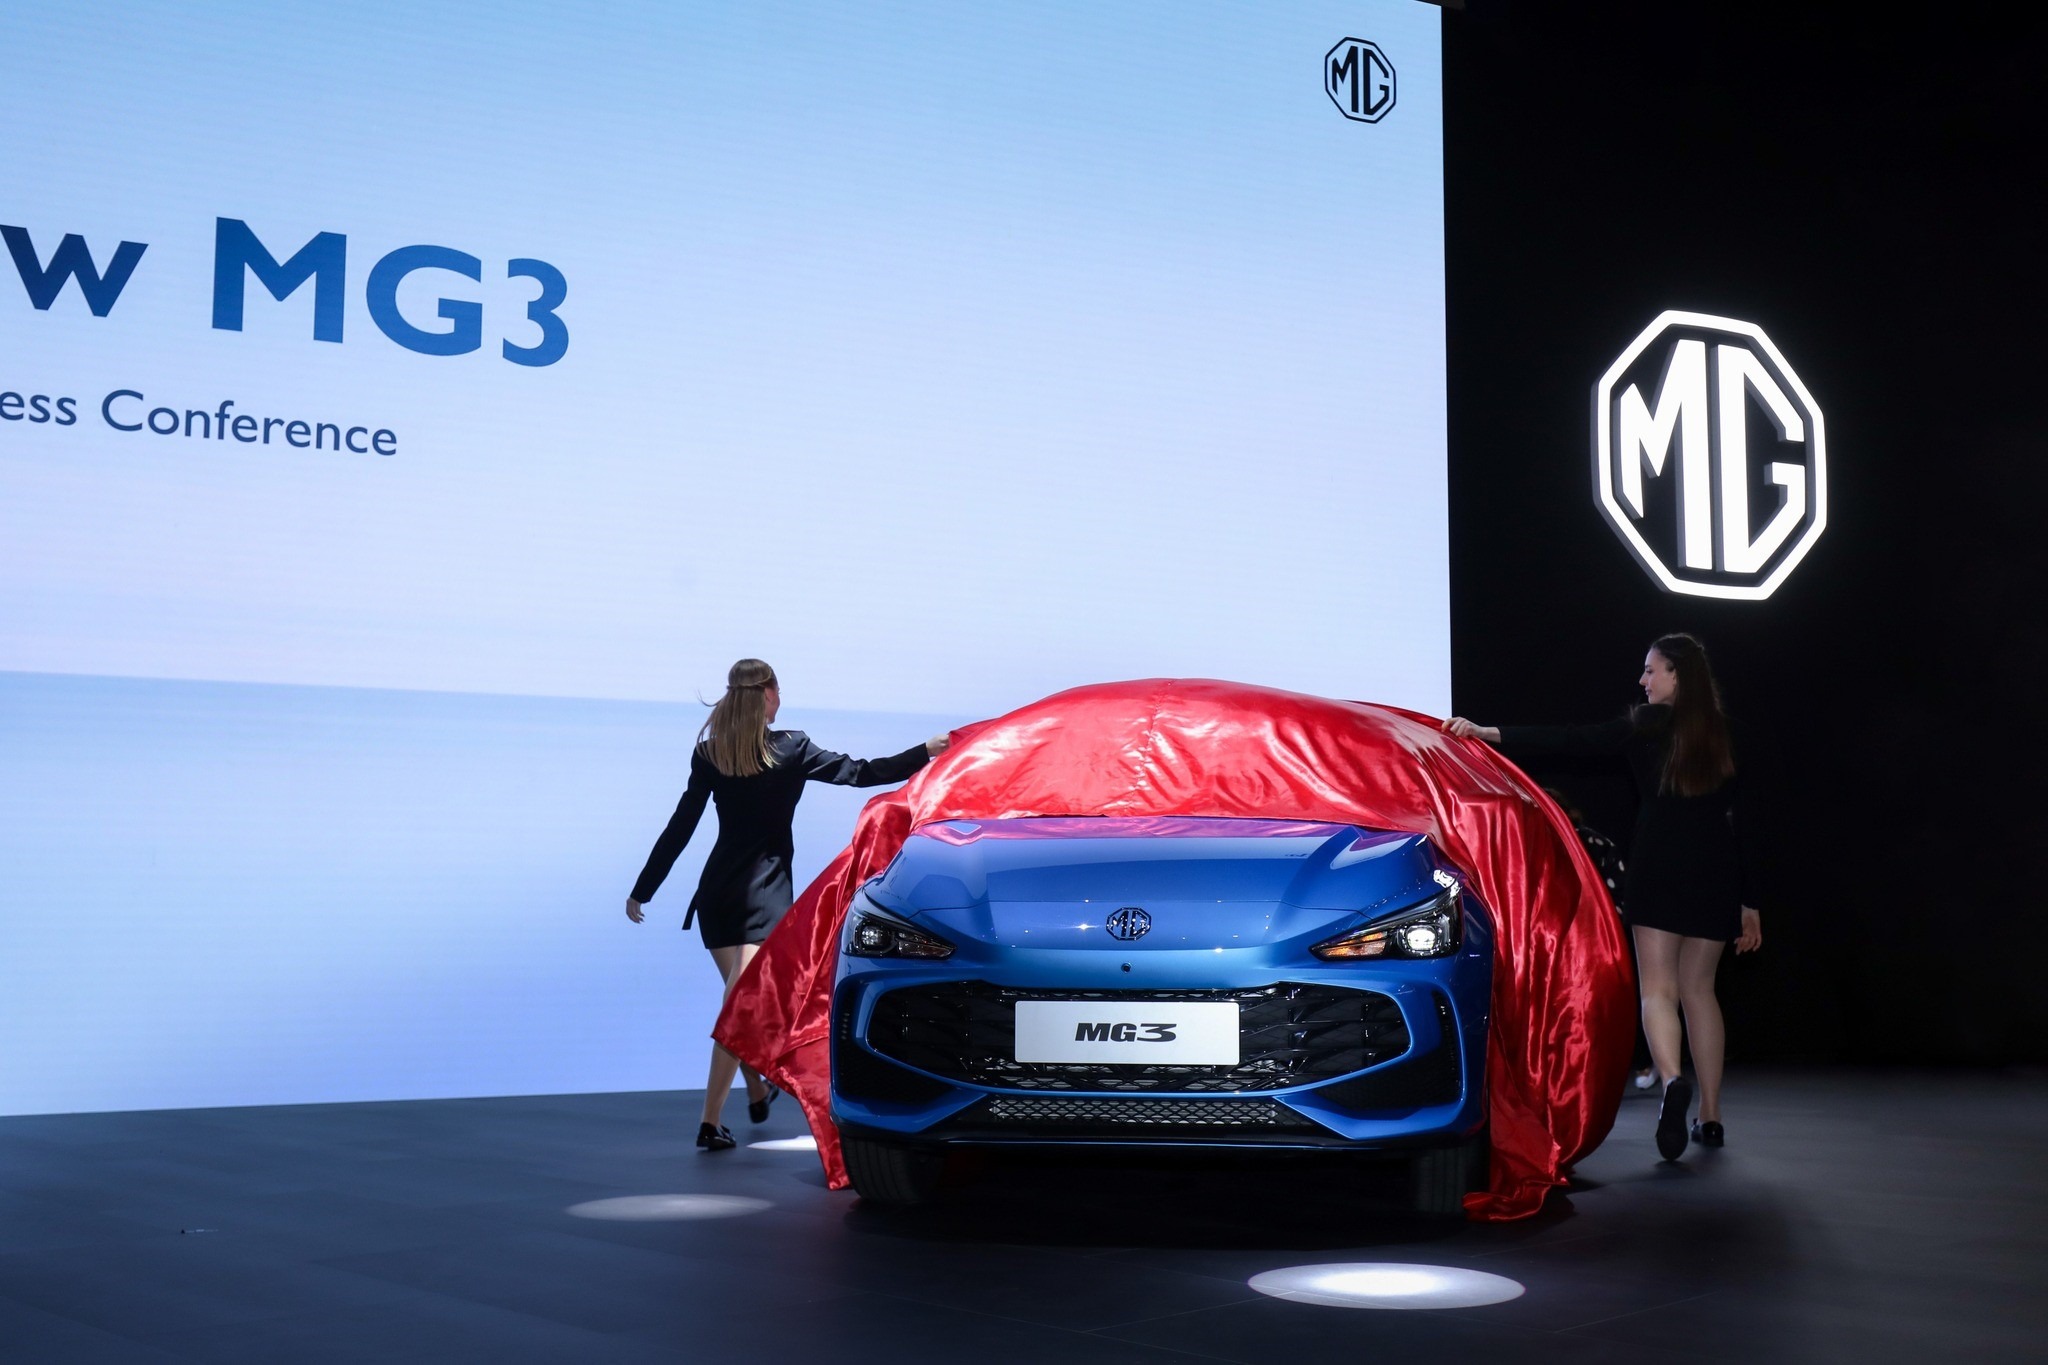 Introducing the all-new MG3 Hybrid+